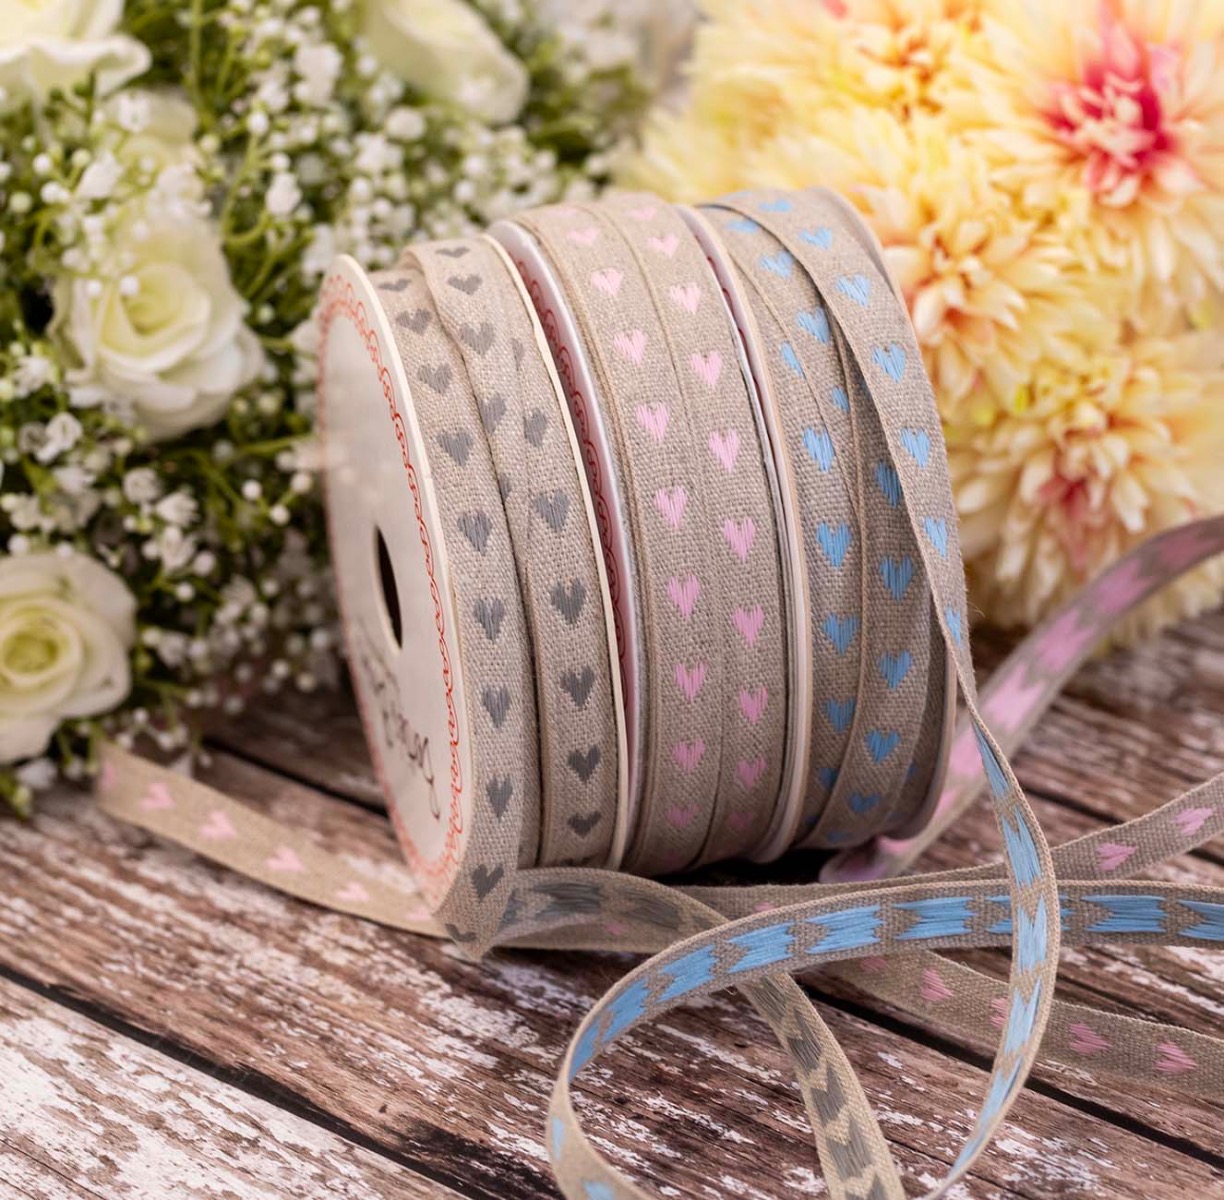 11mm wide linen ribbons on reels with woven heart design